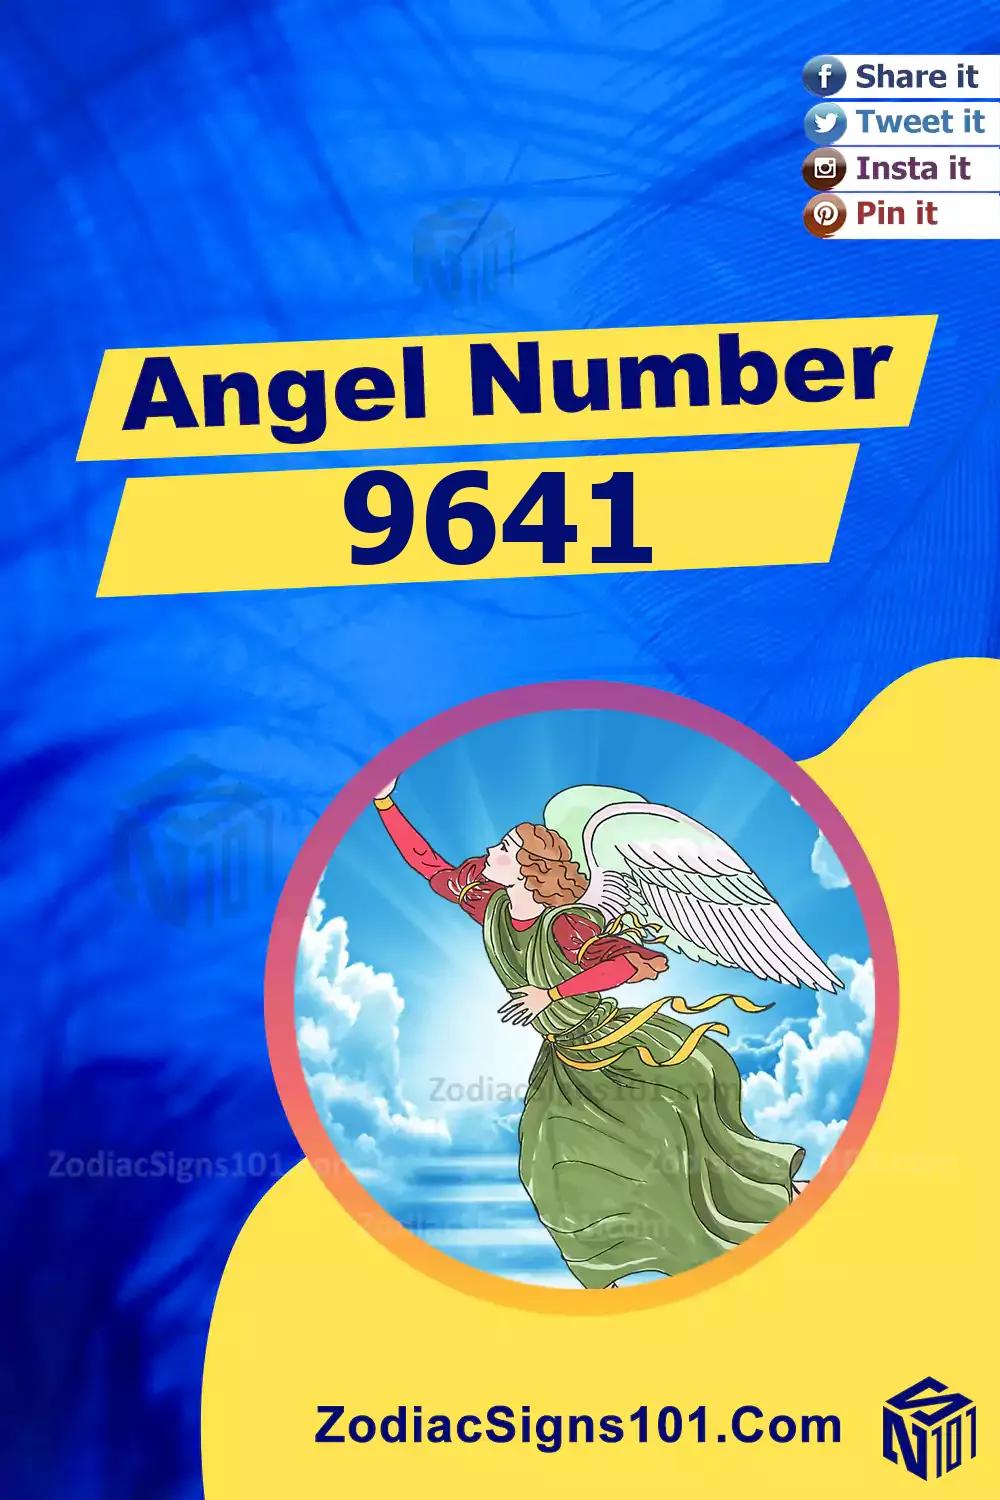 9641 Angel Number Meaning